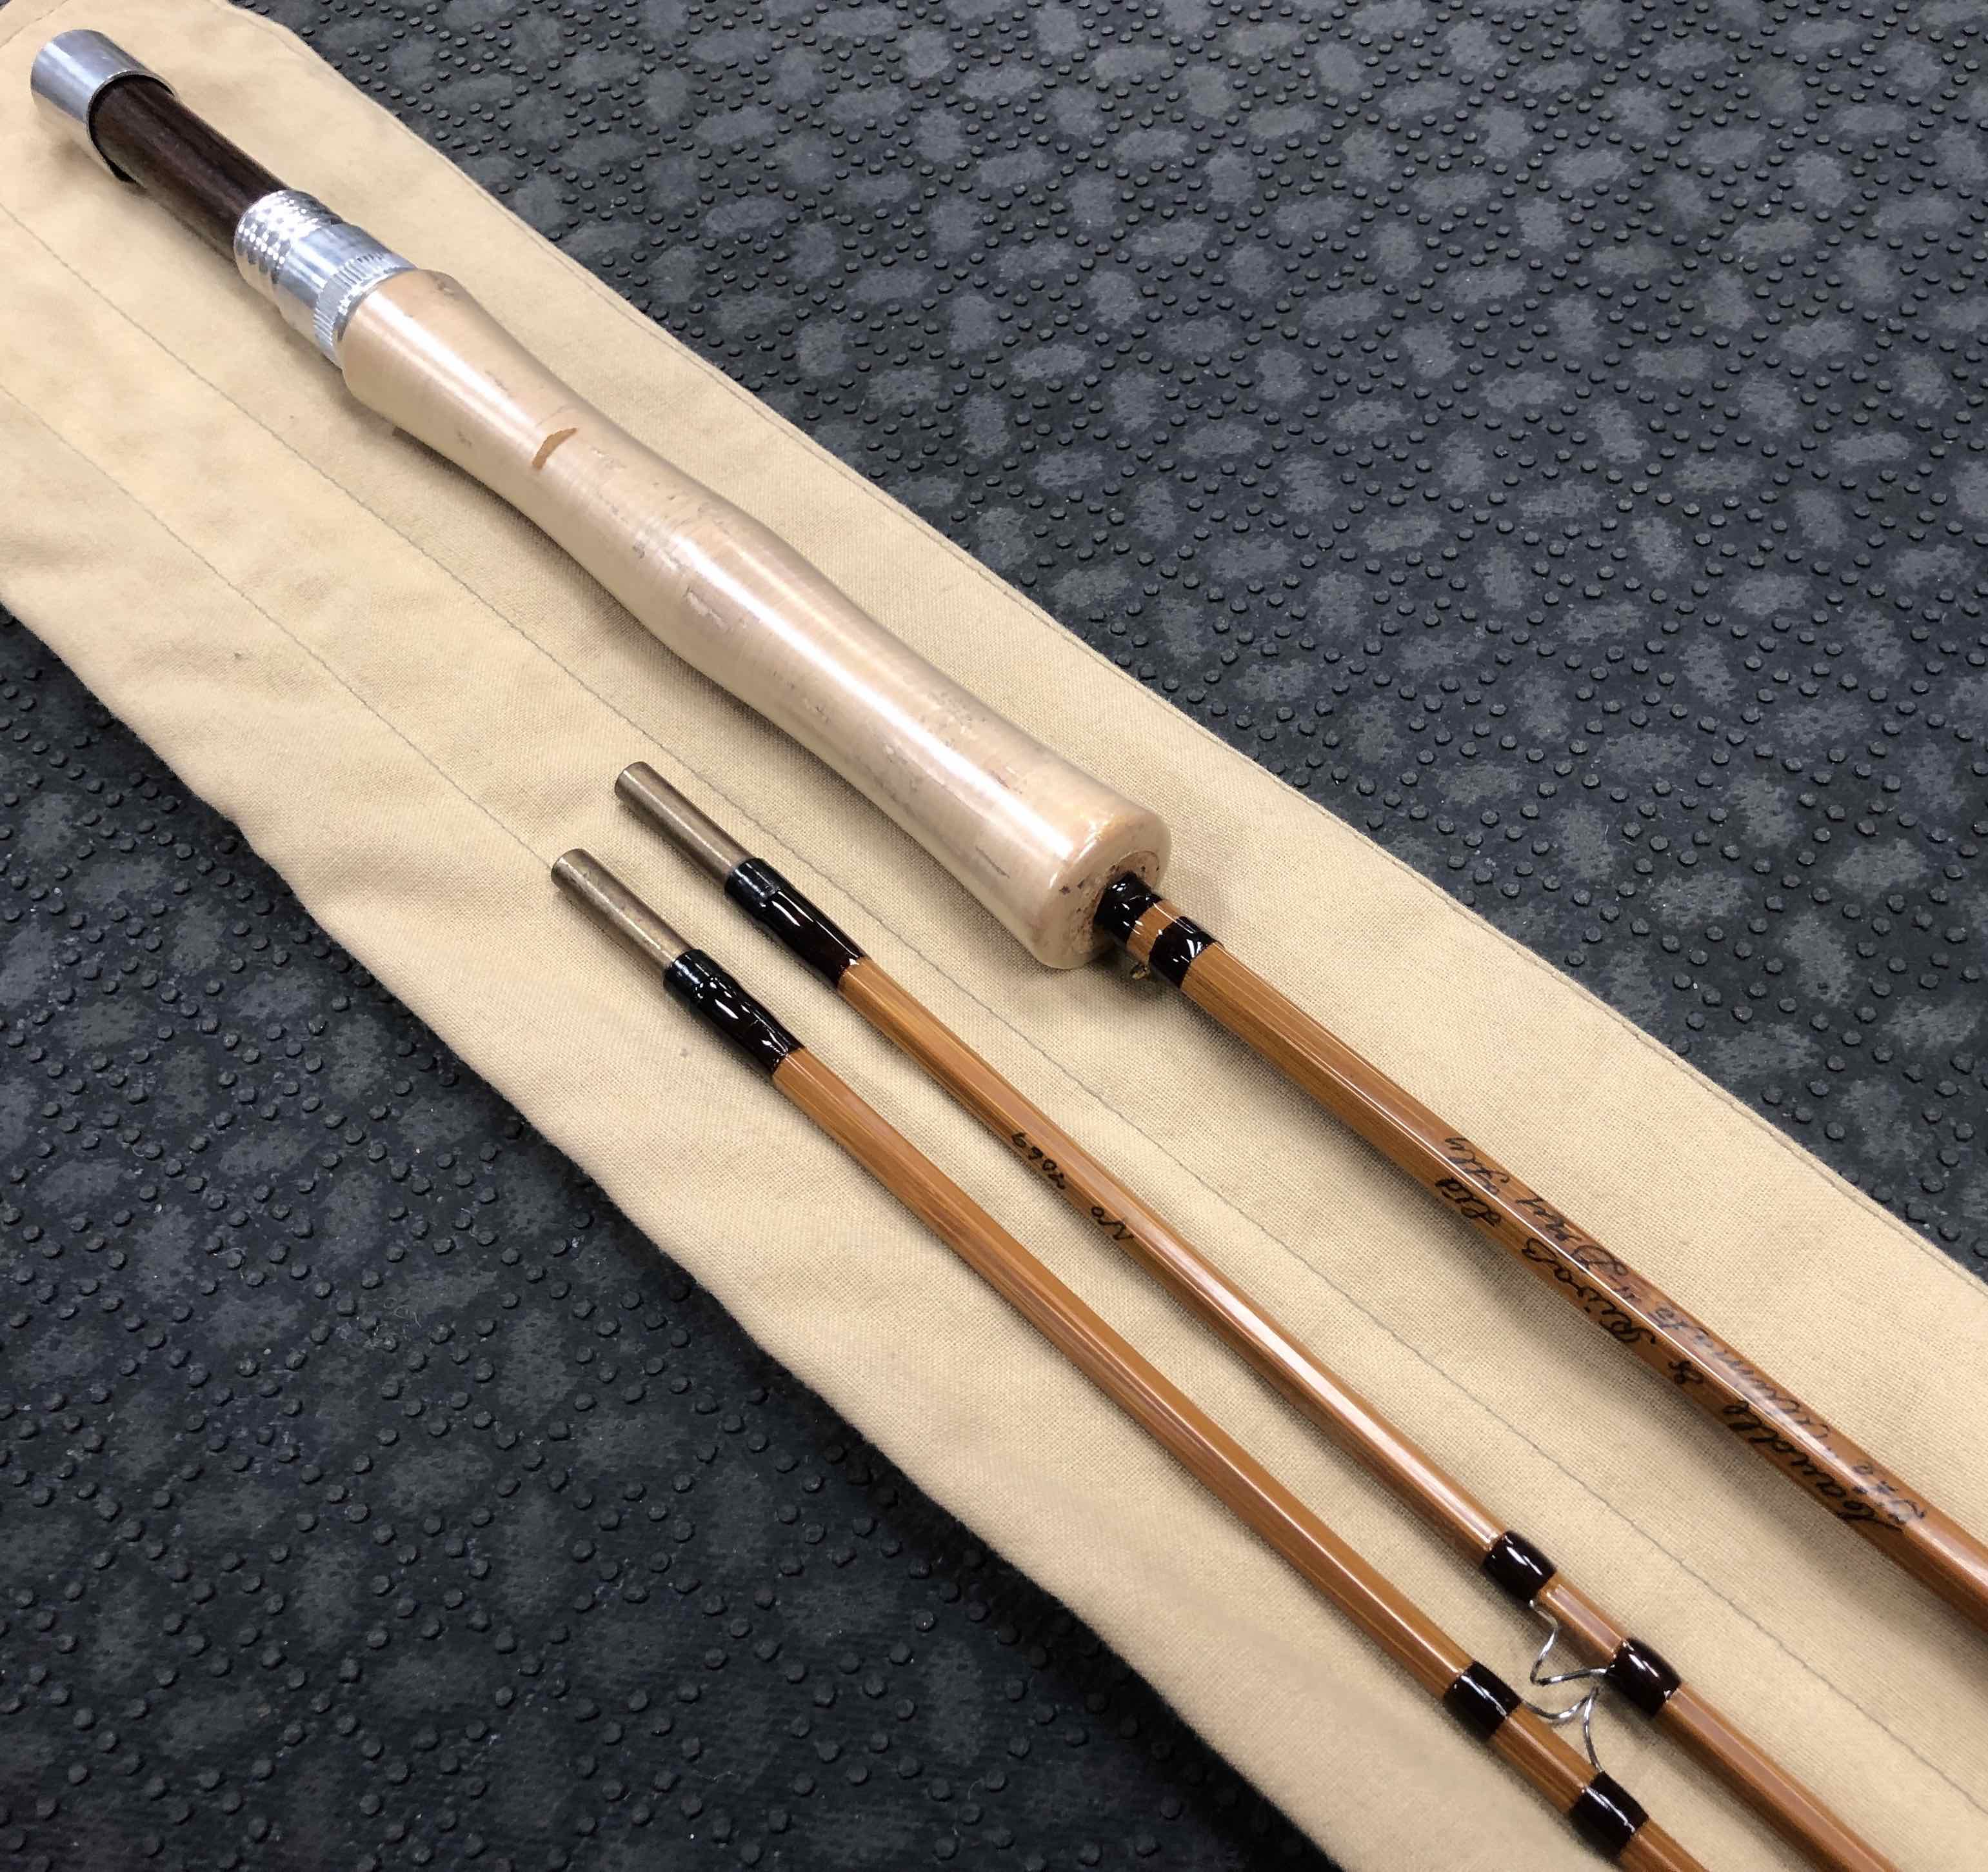 https://thefirstcast.ca/wp-content/uploads/2019/06/Caudle-and-Rivaz-Ltd-Bamboo-Cane-Fly-Rod-8foot-6inch-The-Ultimate-Dry-Fly-Two-Tips-CC.jpg